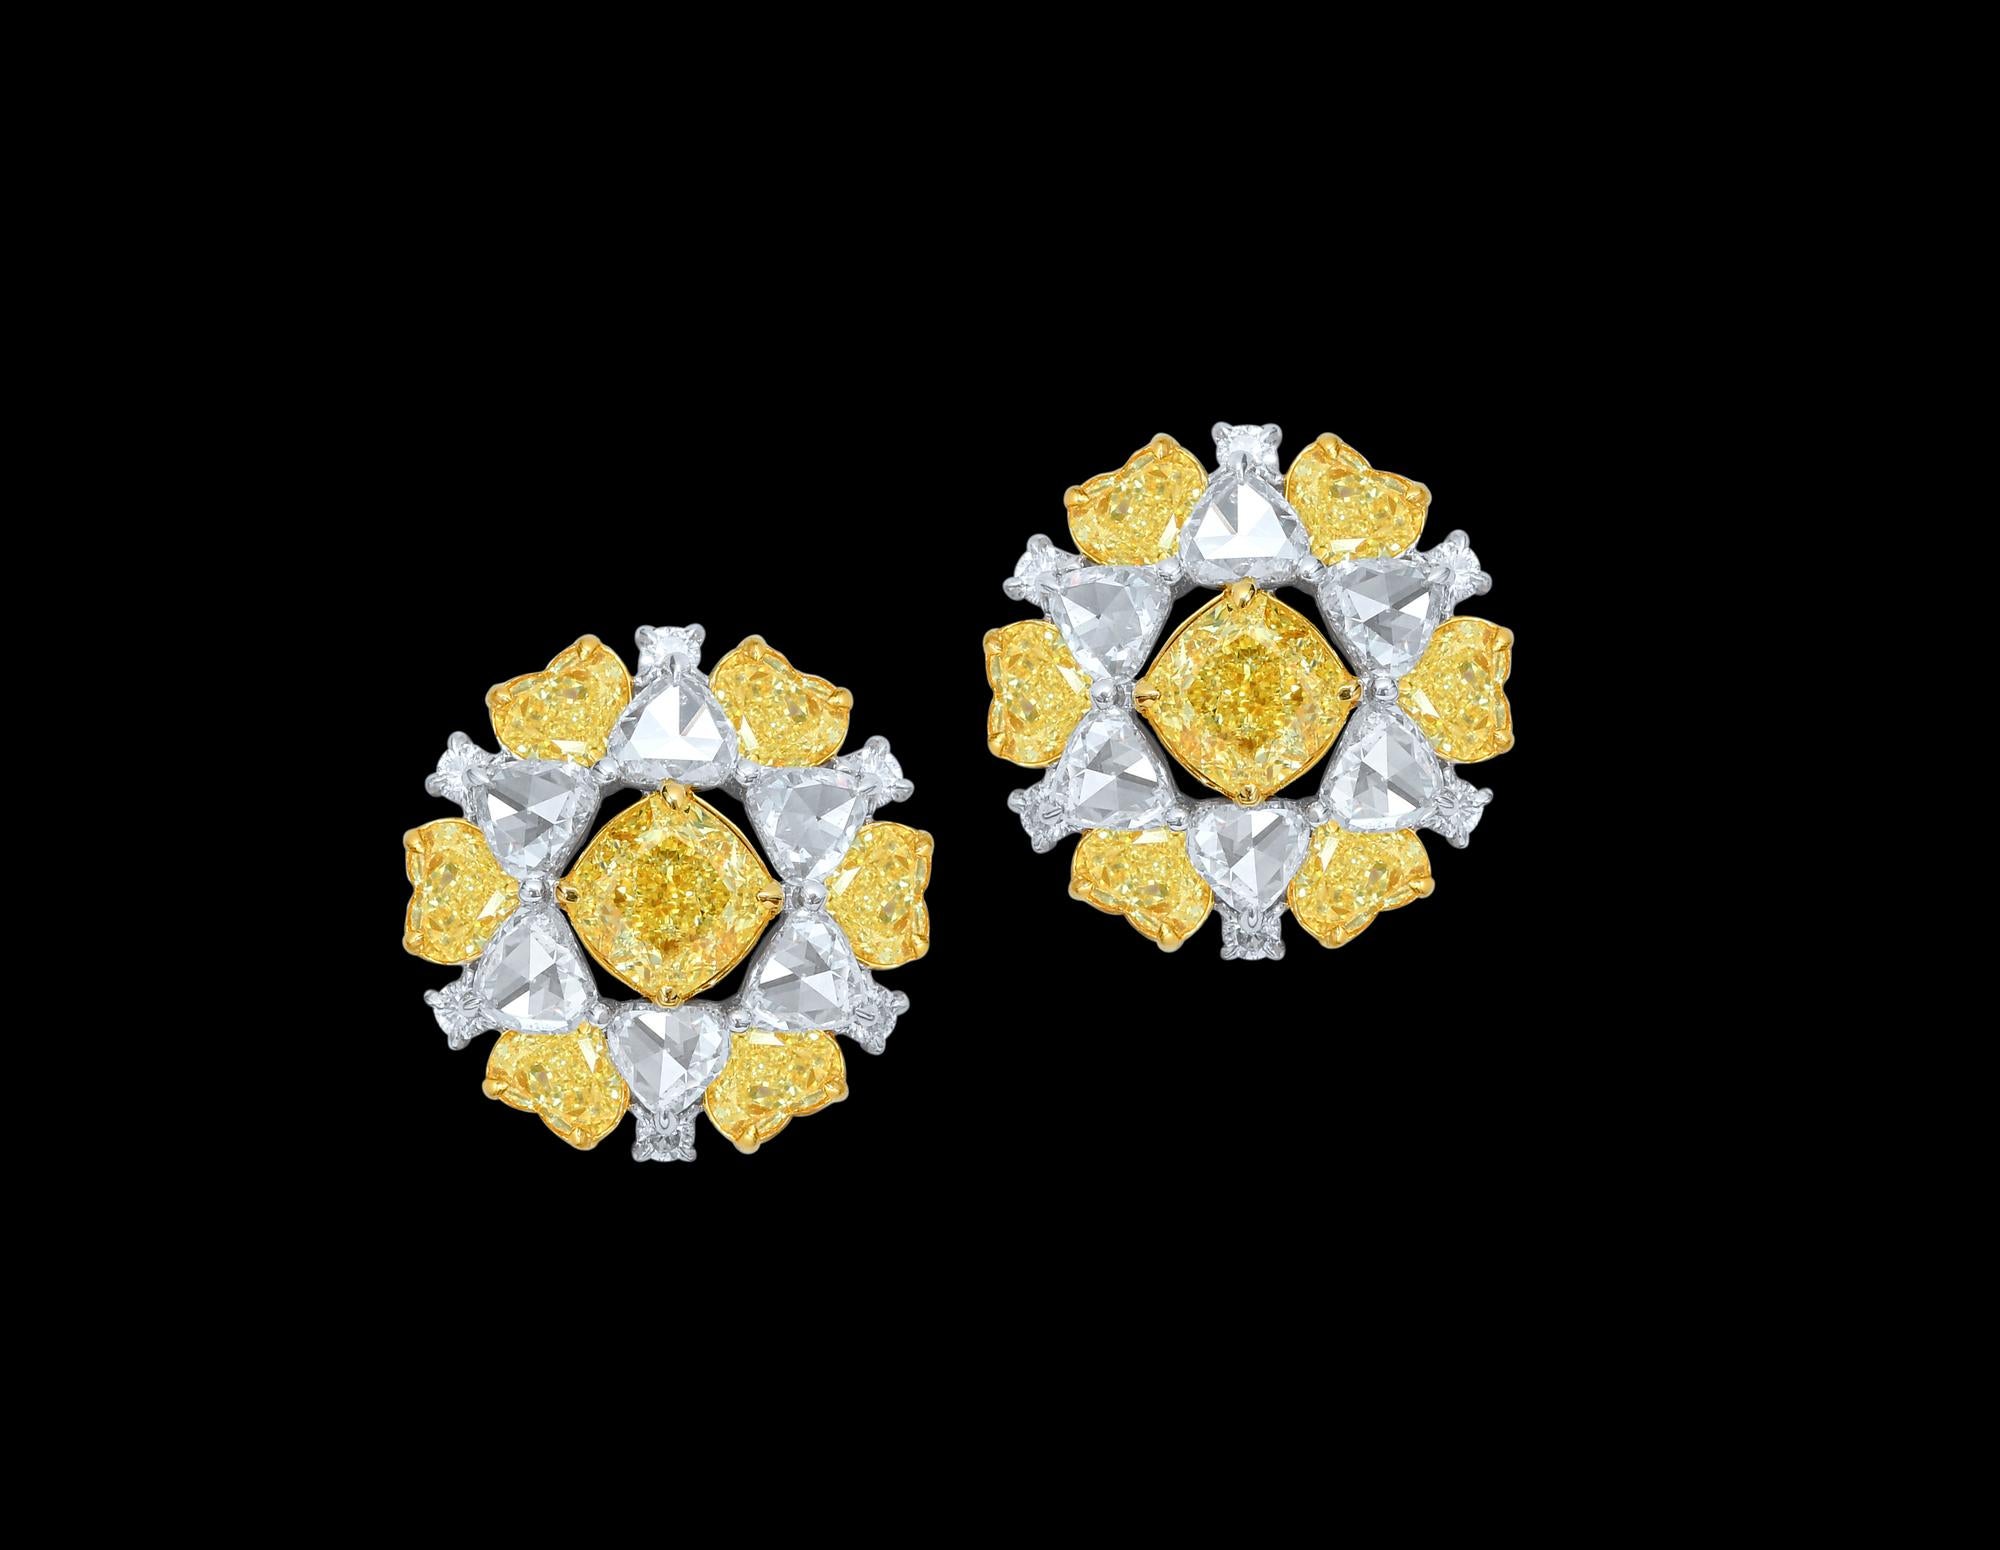 Beautiful pair of cushion shaped diamond floral studs are an all time favorite for female of all ages. 1ct each cushion  shaped fancy colored diamonds are surrounded by perfectly matching heart shape yellow diamonds & flanked with rose cut white